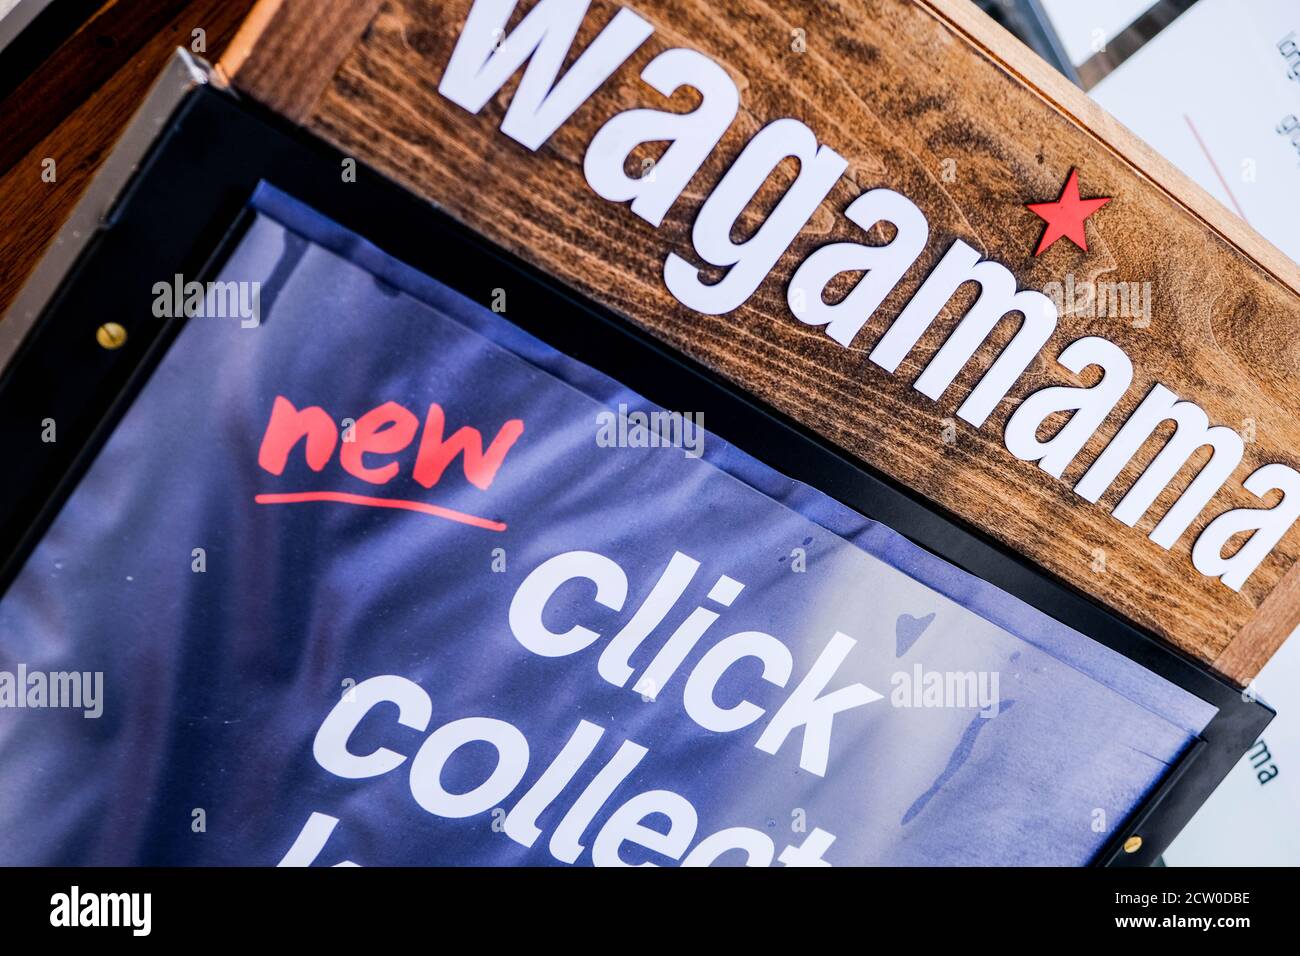 Wagamama Restaurant Pavement Advertising Boards Attracting Customers In Hospitality Industry Crisis COVID-19 Stock Photo